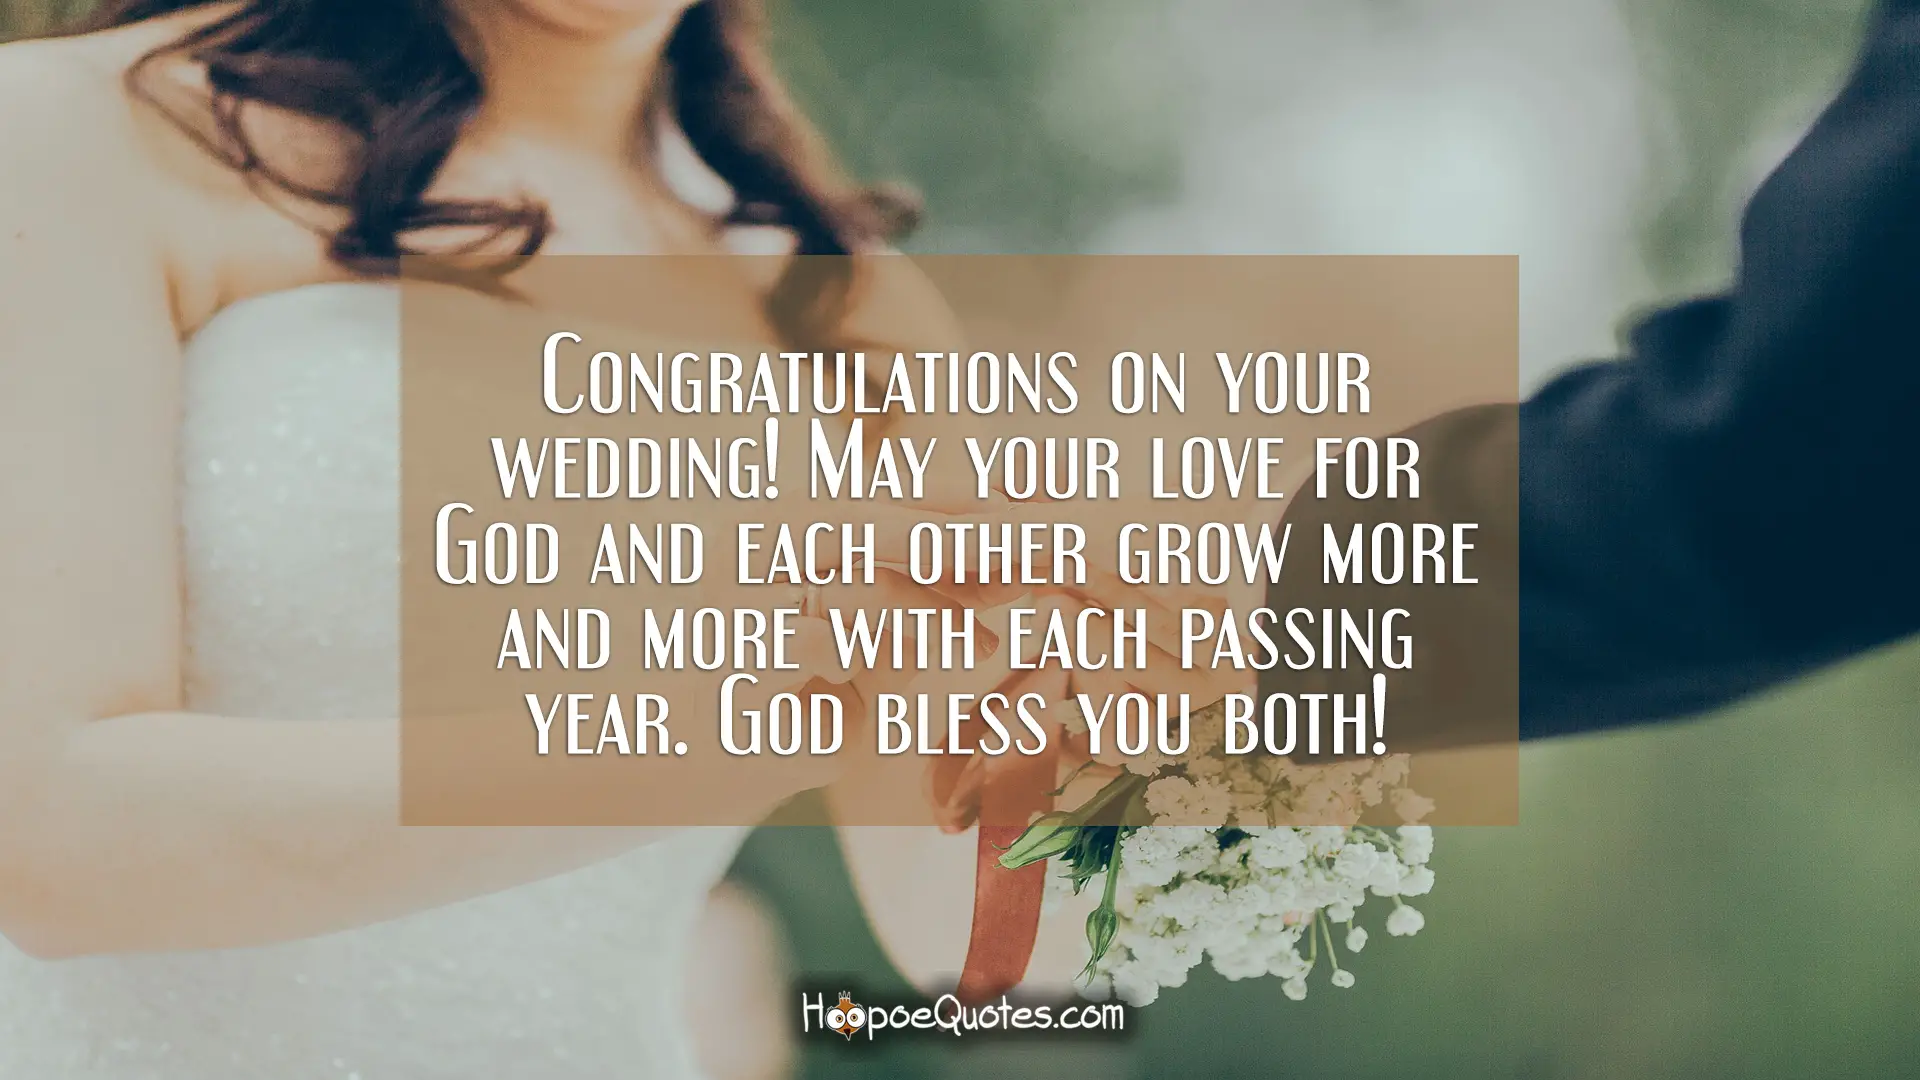 God Bless Your Marriage Message For Friends